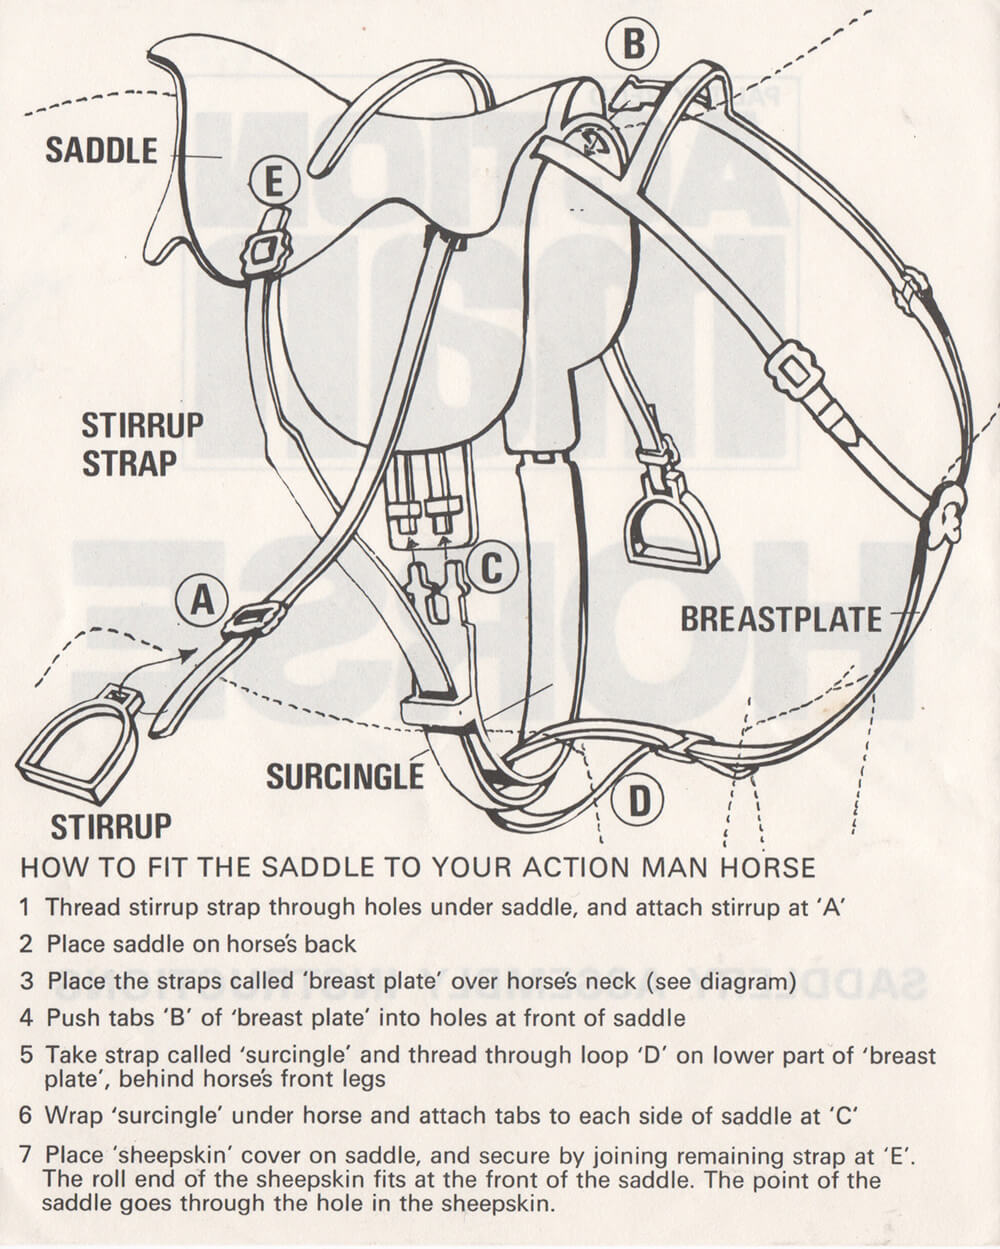 Action Man Horse Instuctions